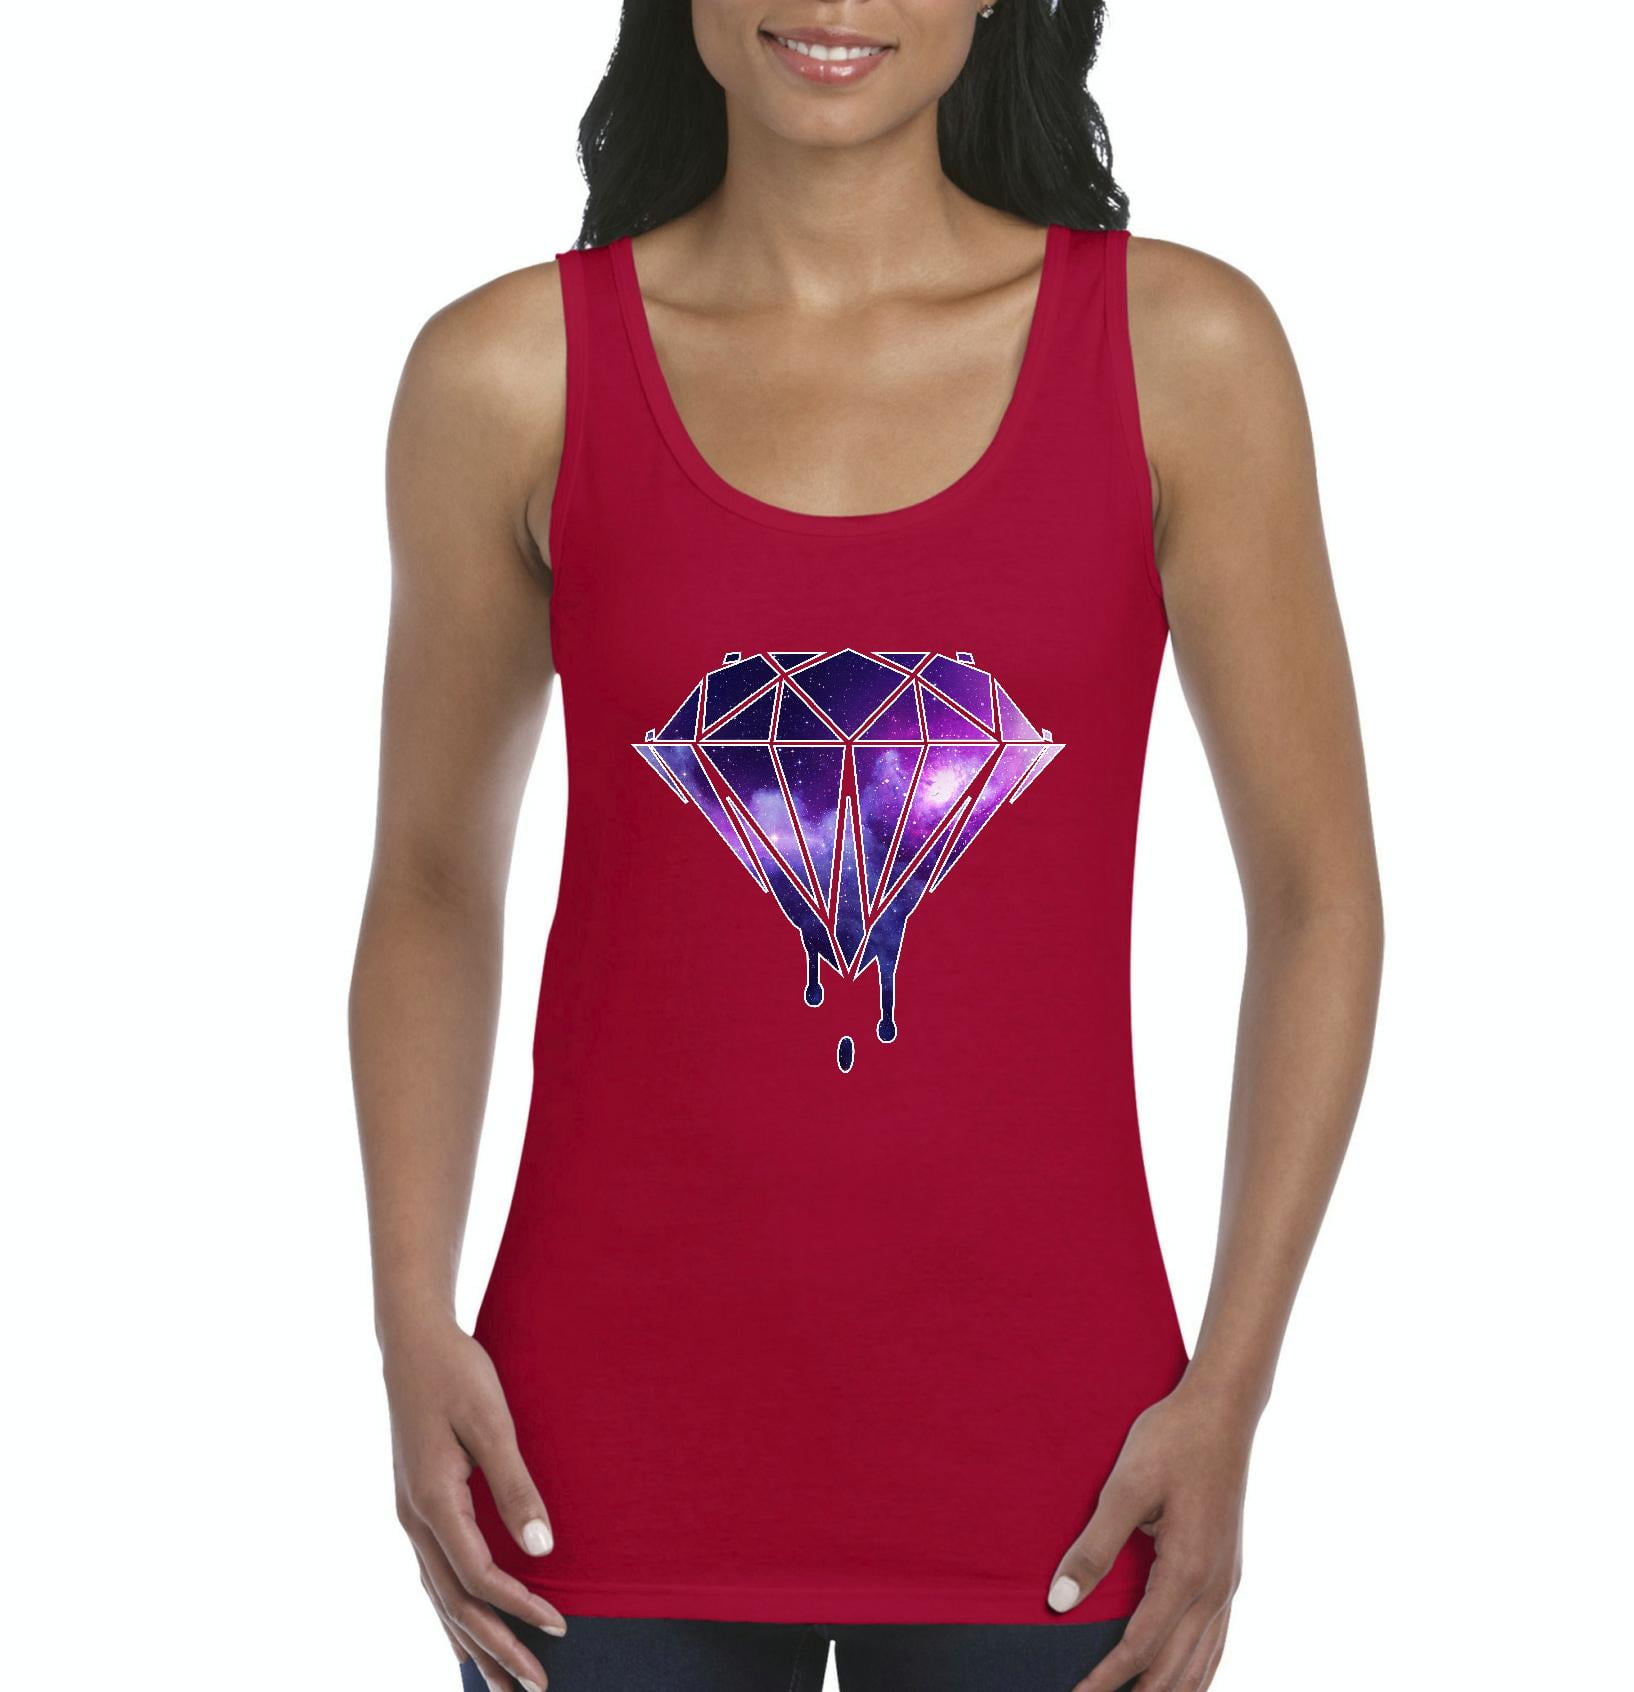 Radiant Orchid Tees by Tina Cami 